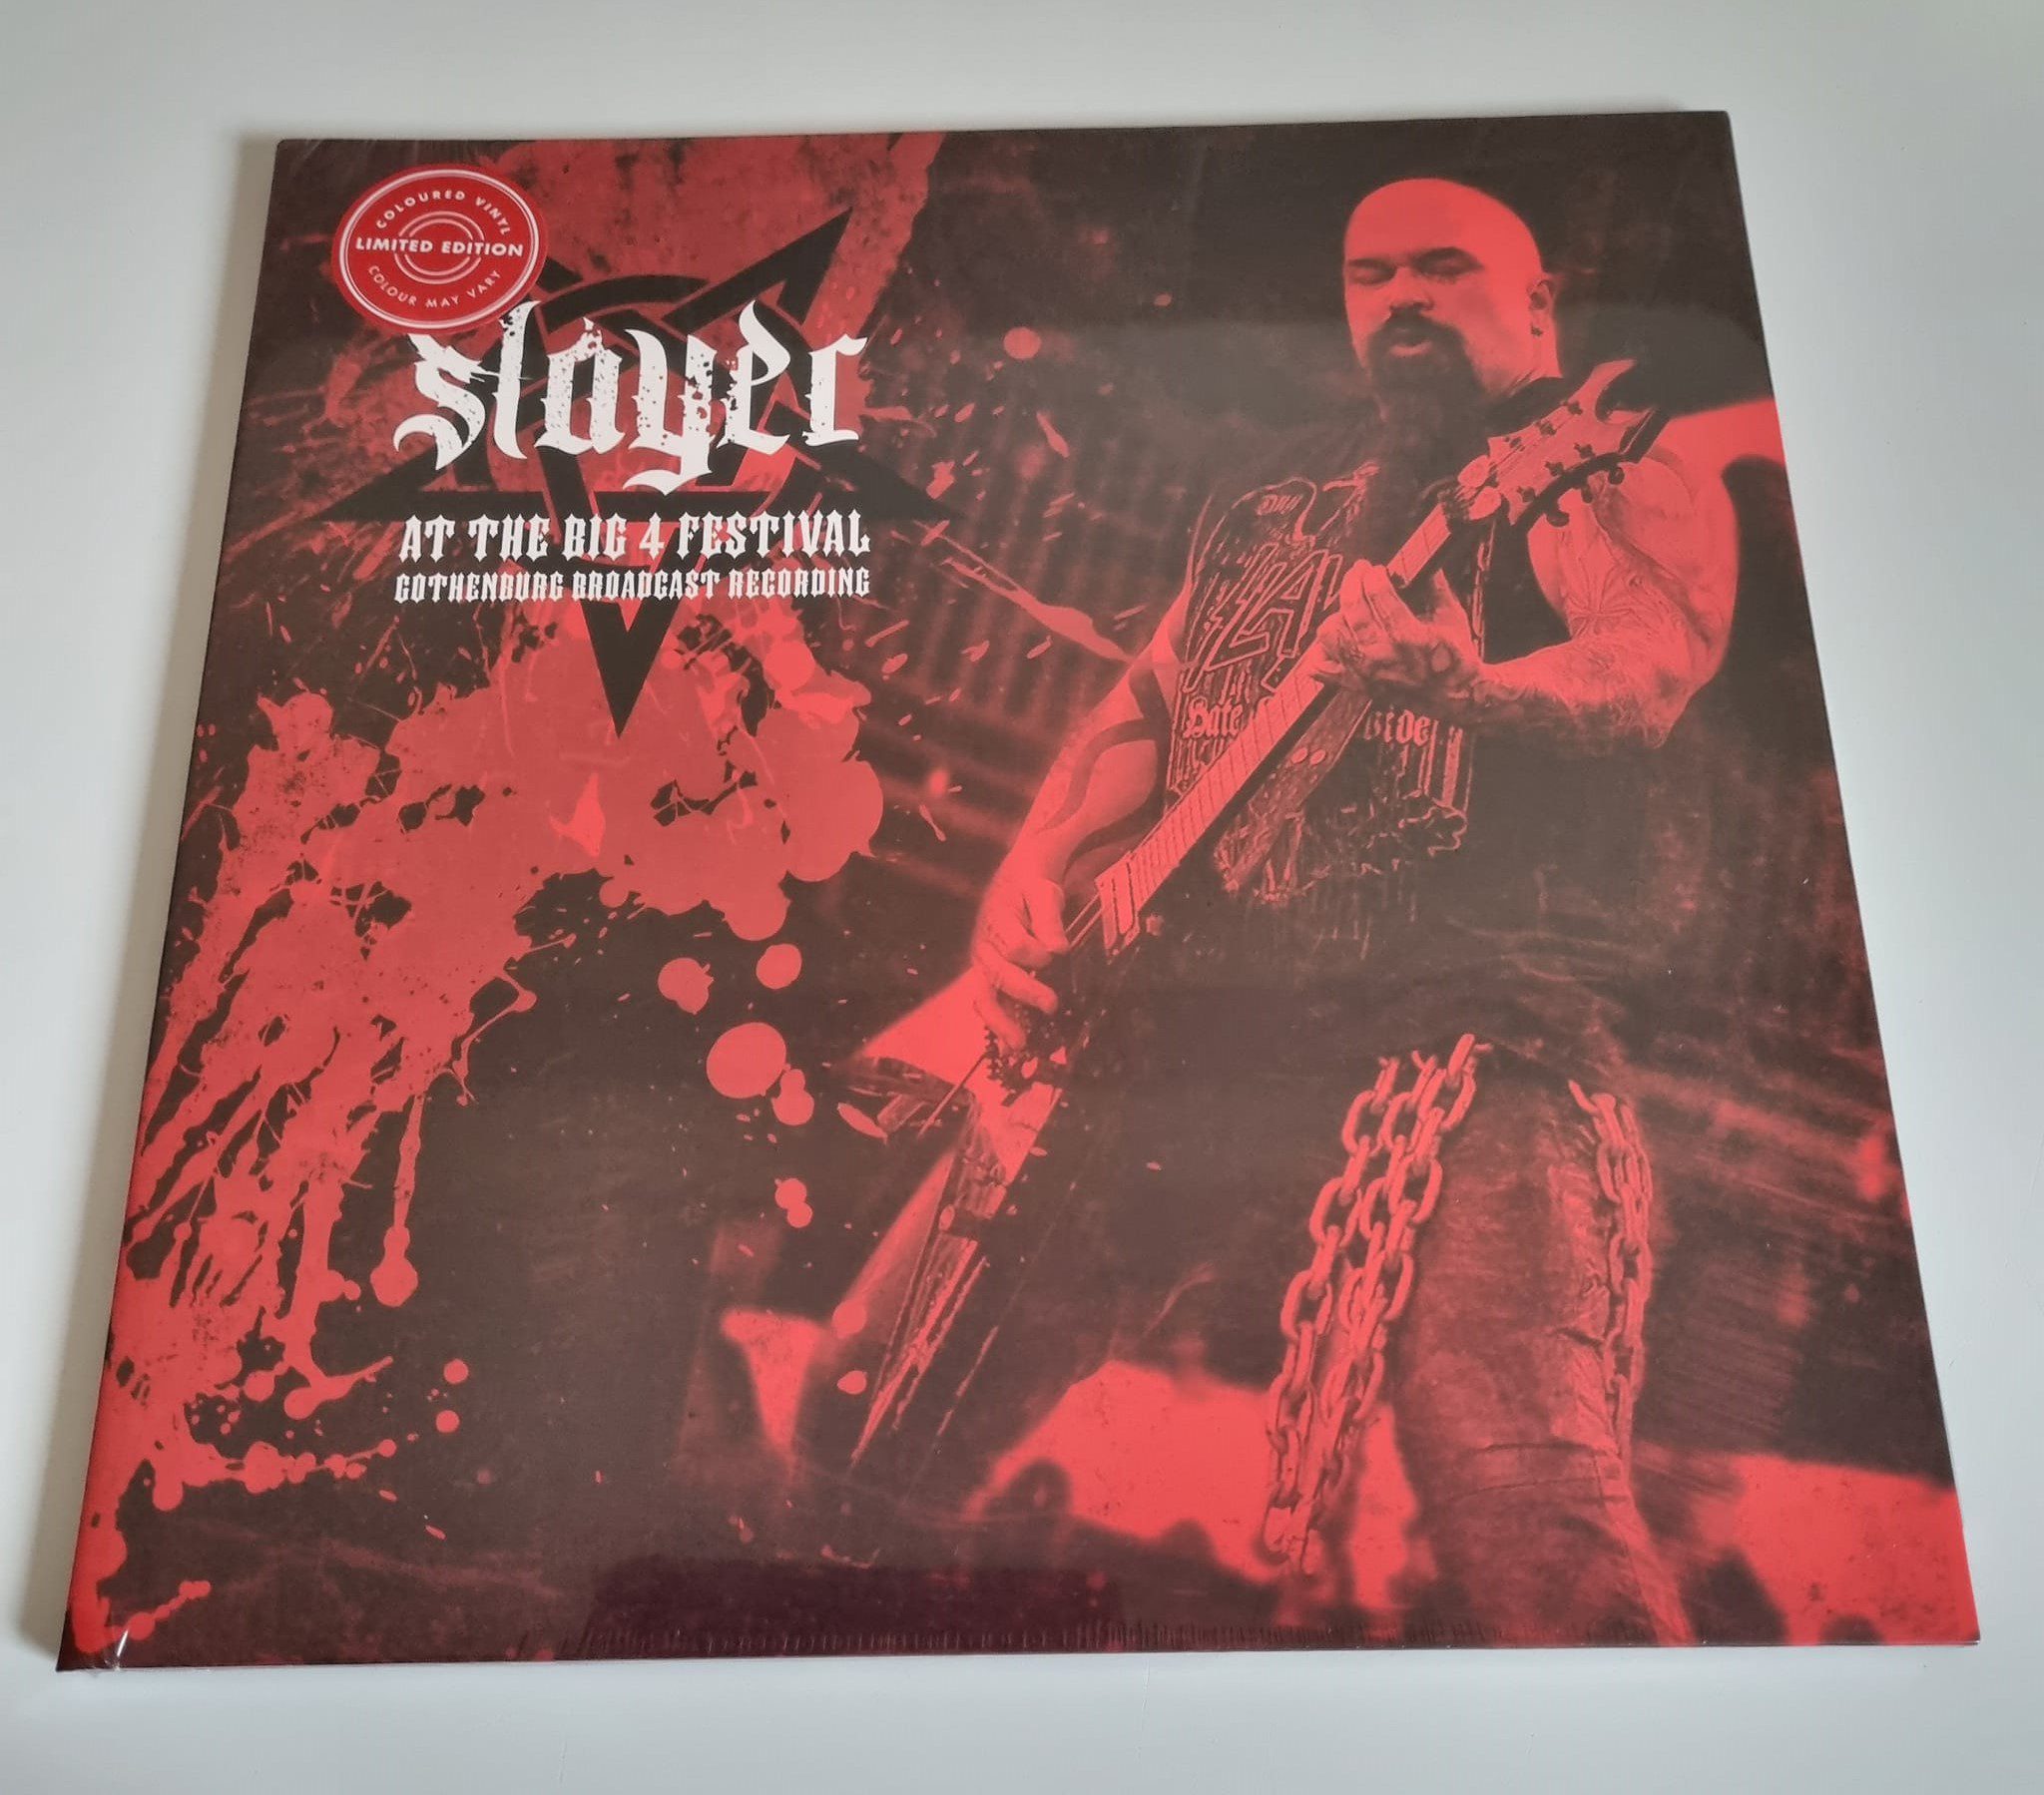 Buy this rare Slayer record by clicking here